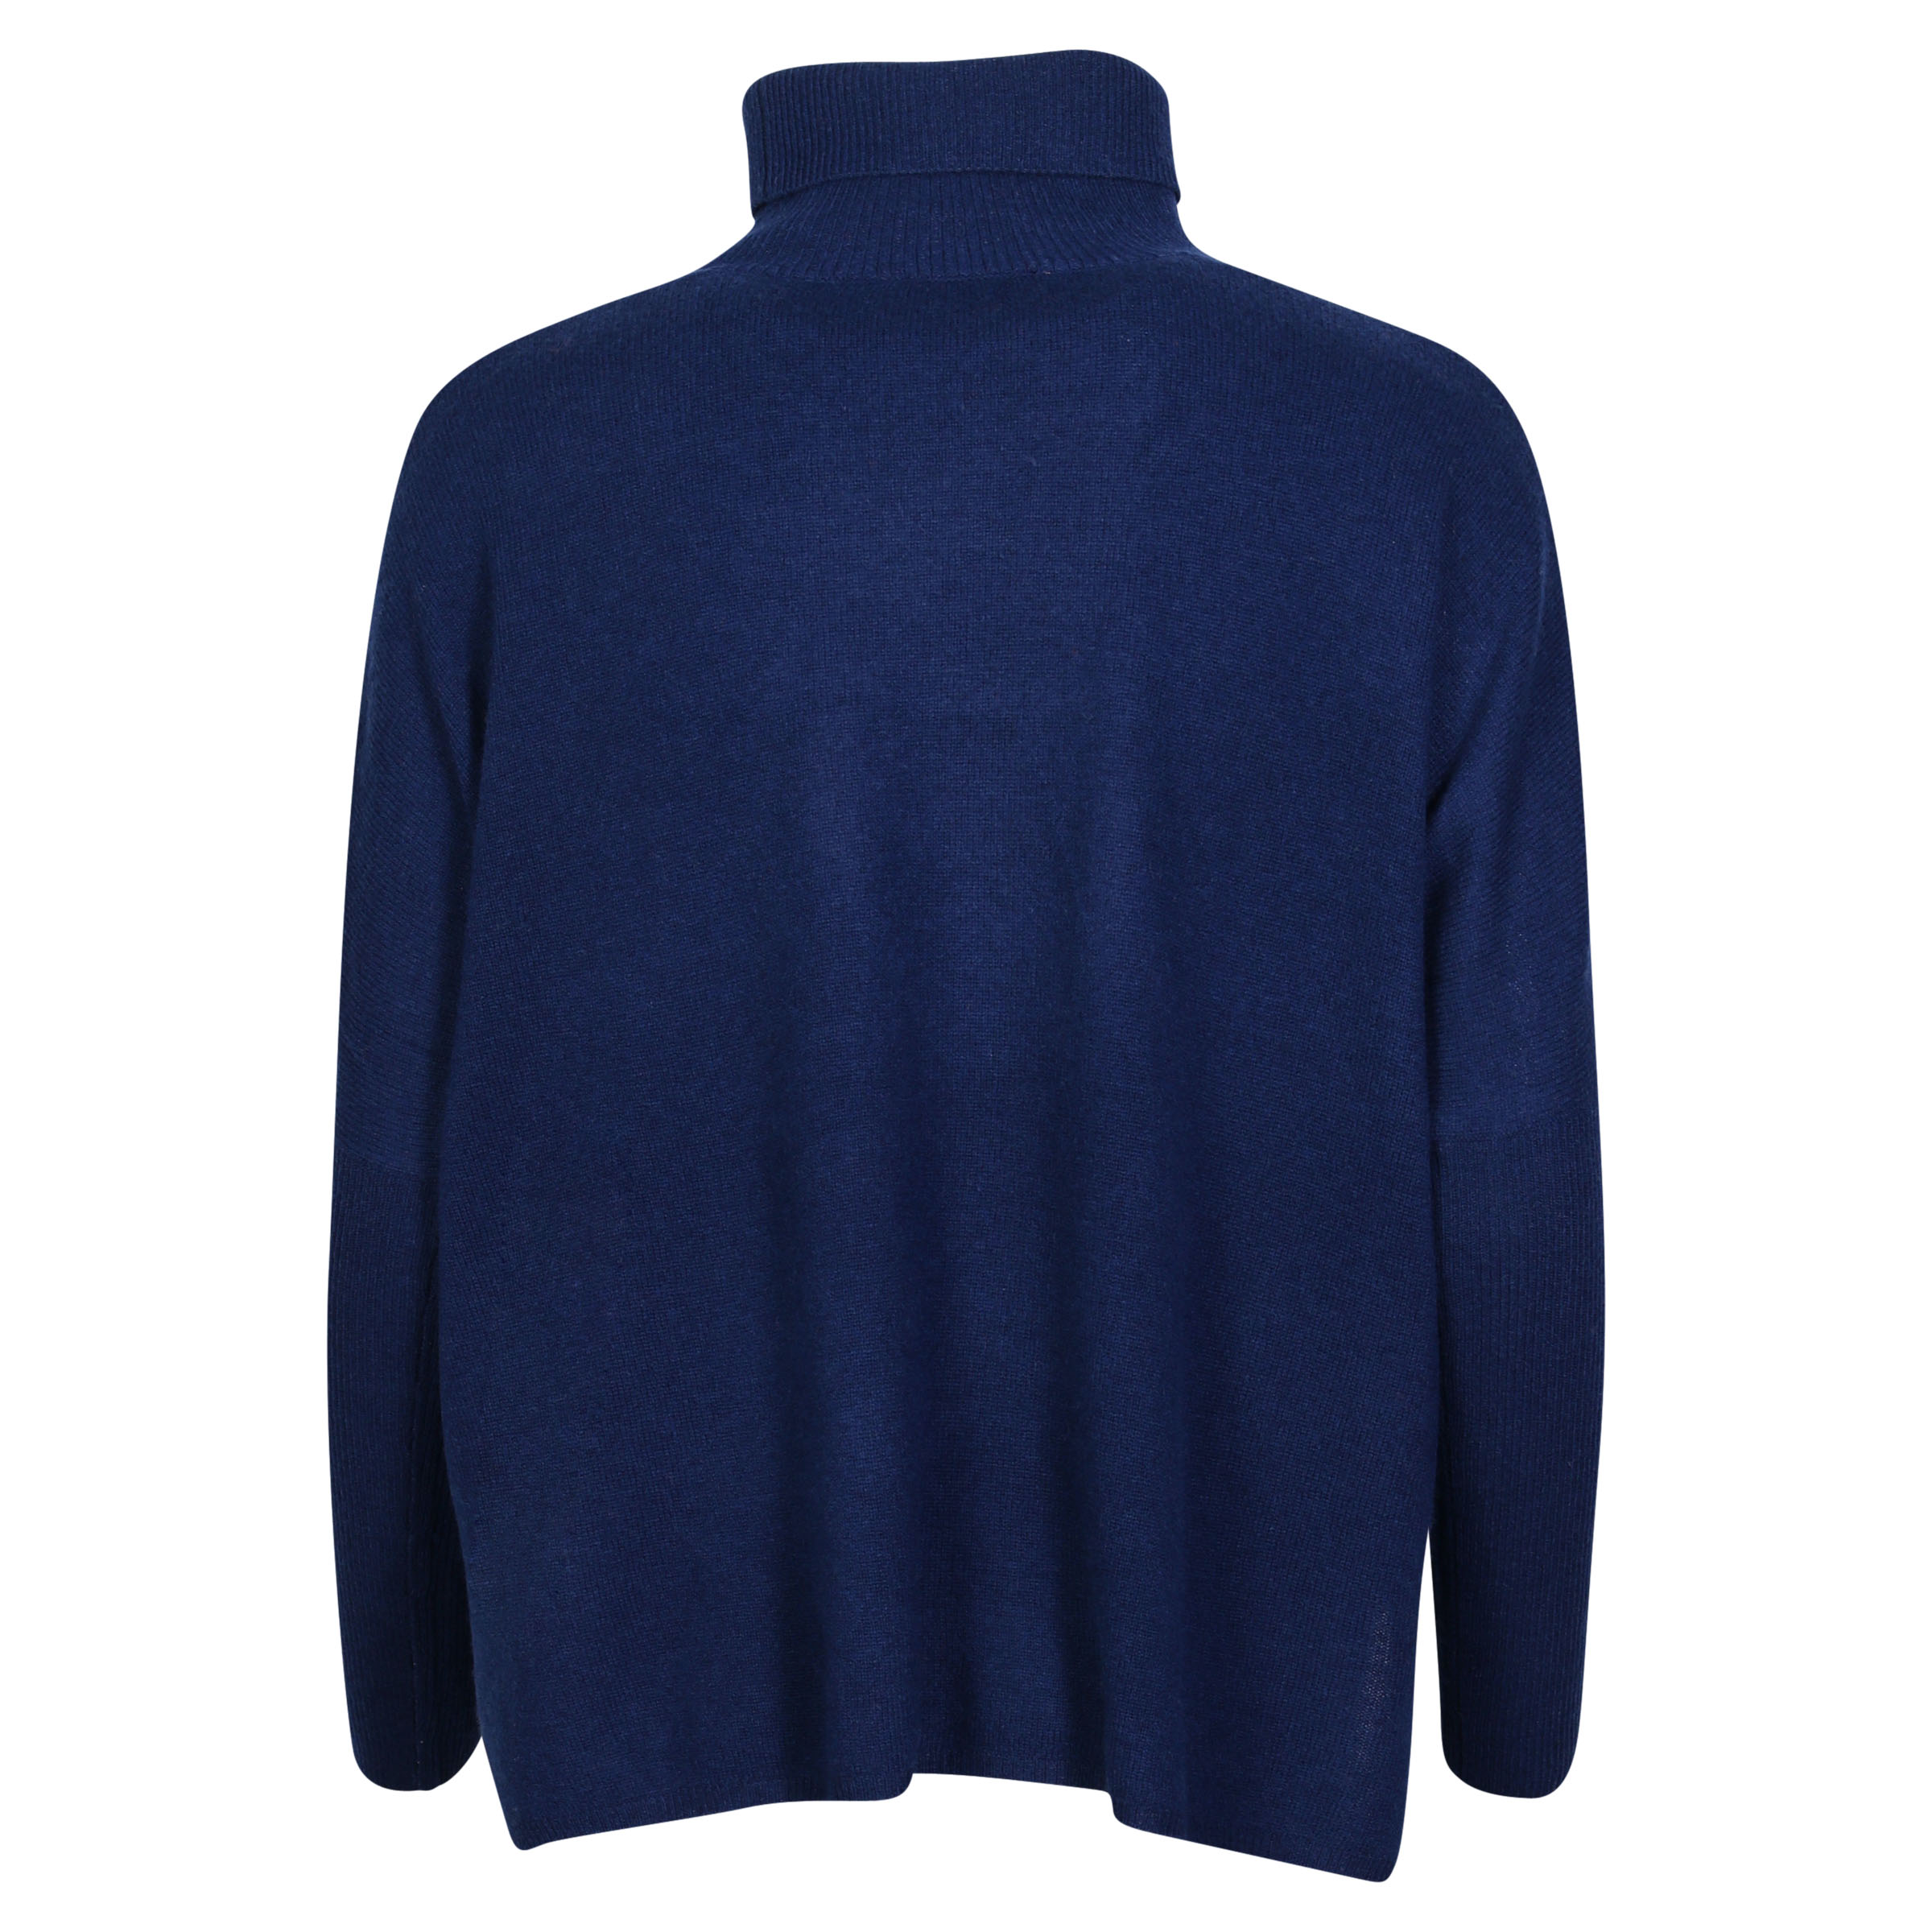 Absolut Cashmere Oversized Turtle Neck Sweater Clara in Royal Blue